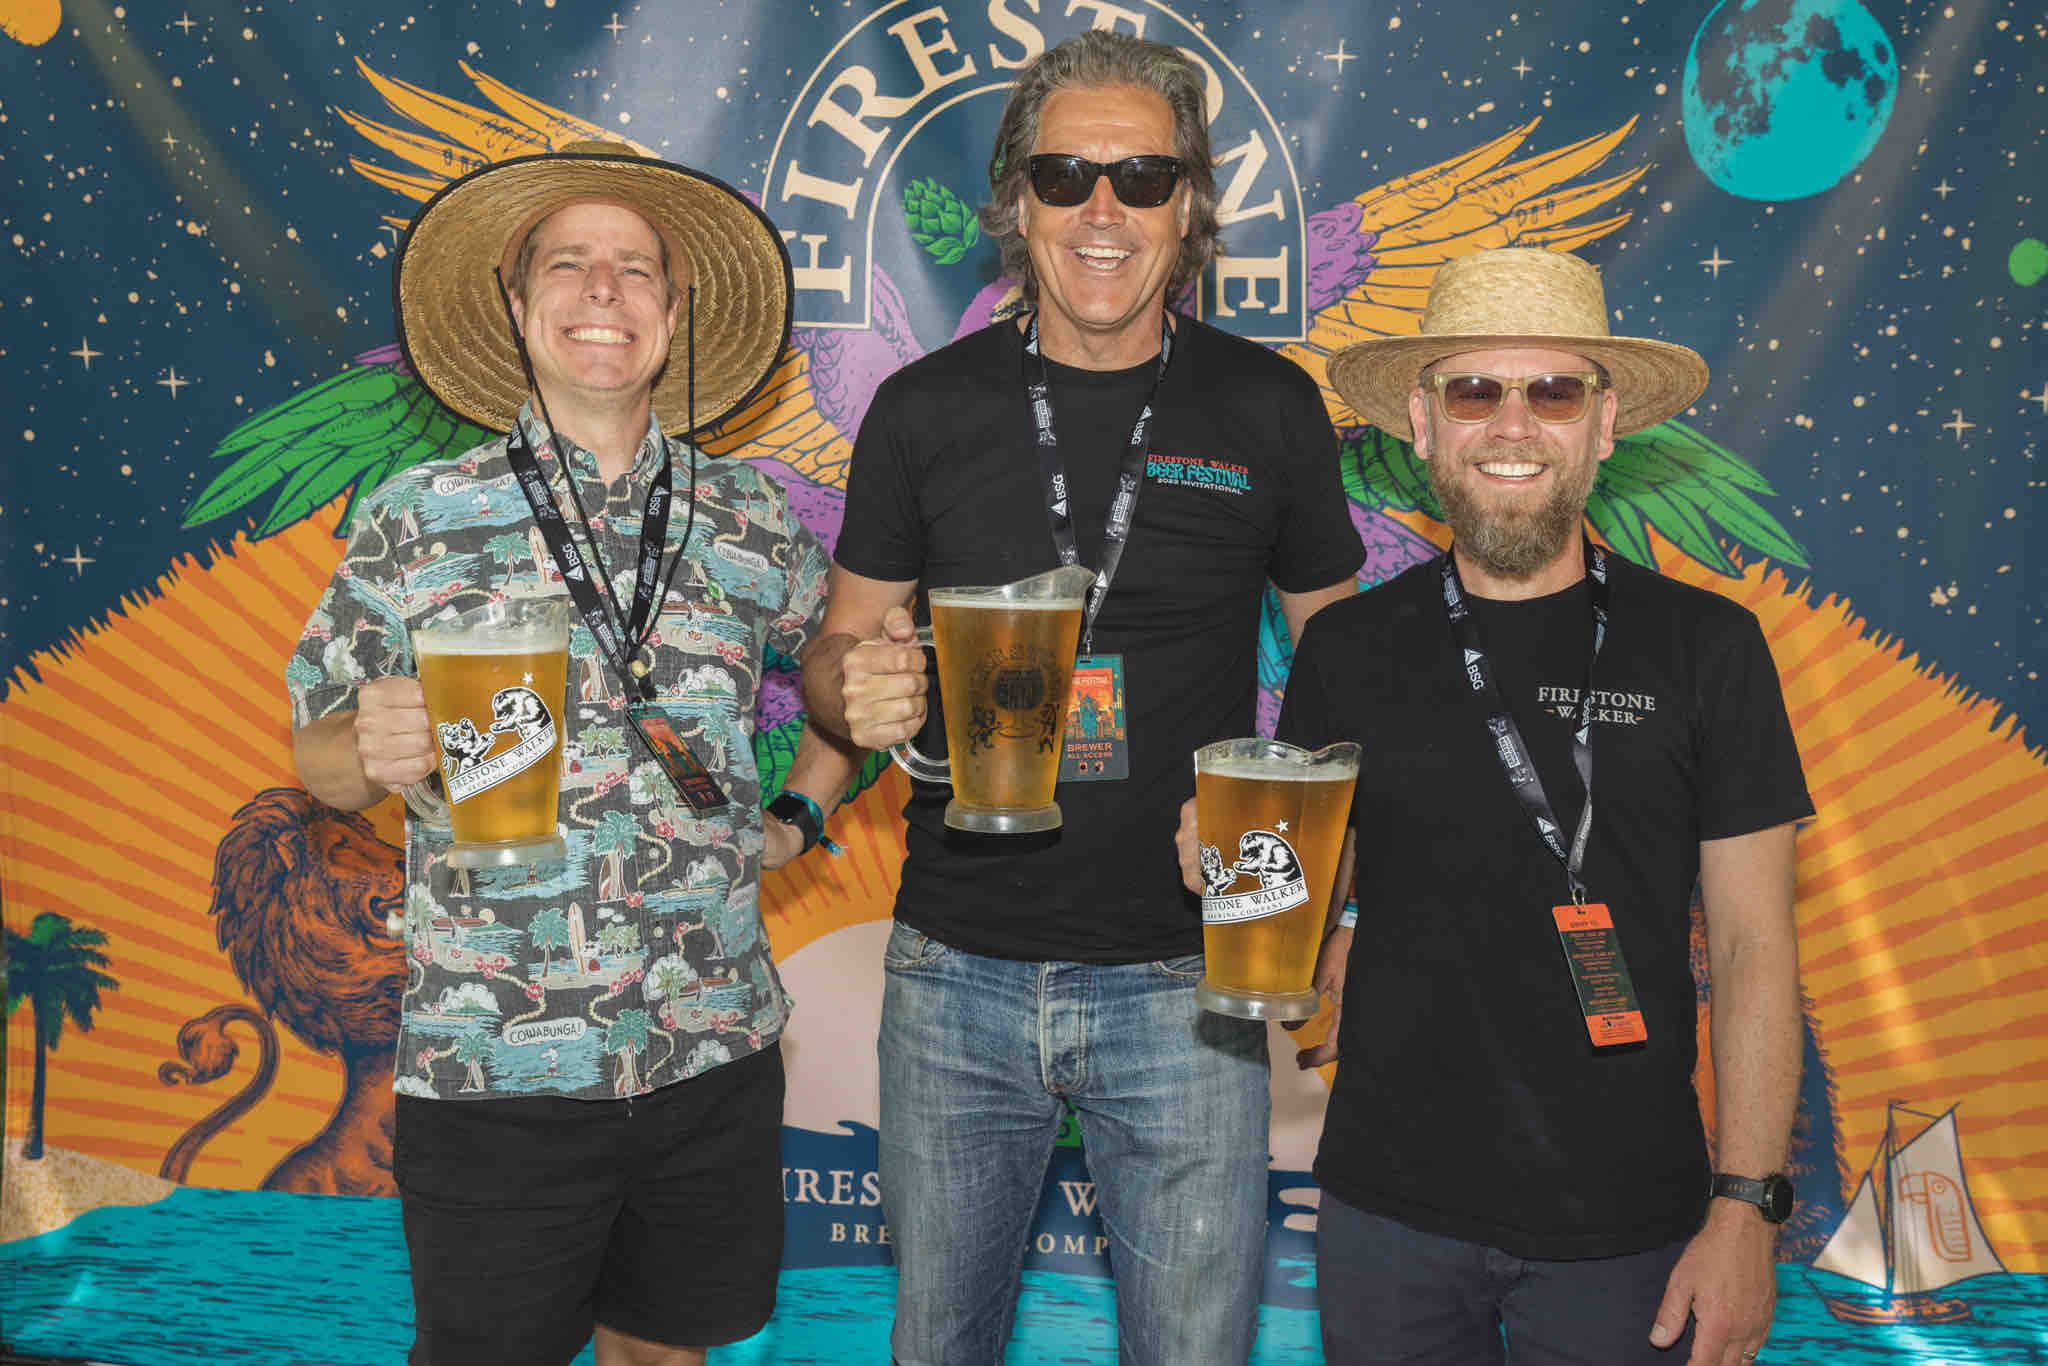 Evan Price from Green Cheek Beer Co. and David Walker and Matt Brynildson from Firestone Walker Brewing at the 2022 Firestone Invitational Beer Fest. The two breweries collaborated on Parrotphrase, a dry-hopped grisette ale brewed just for the 2022 Firestone Walker Invitational Beer Fest. (image courtesy of Firestone Walker Brewing)